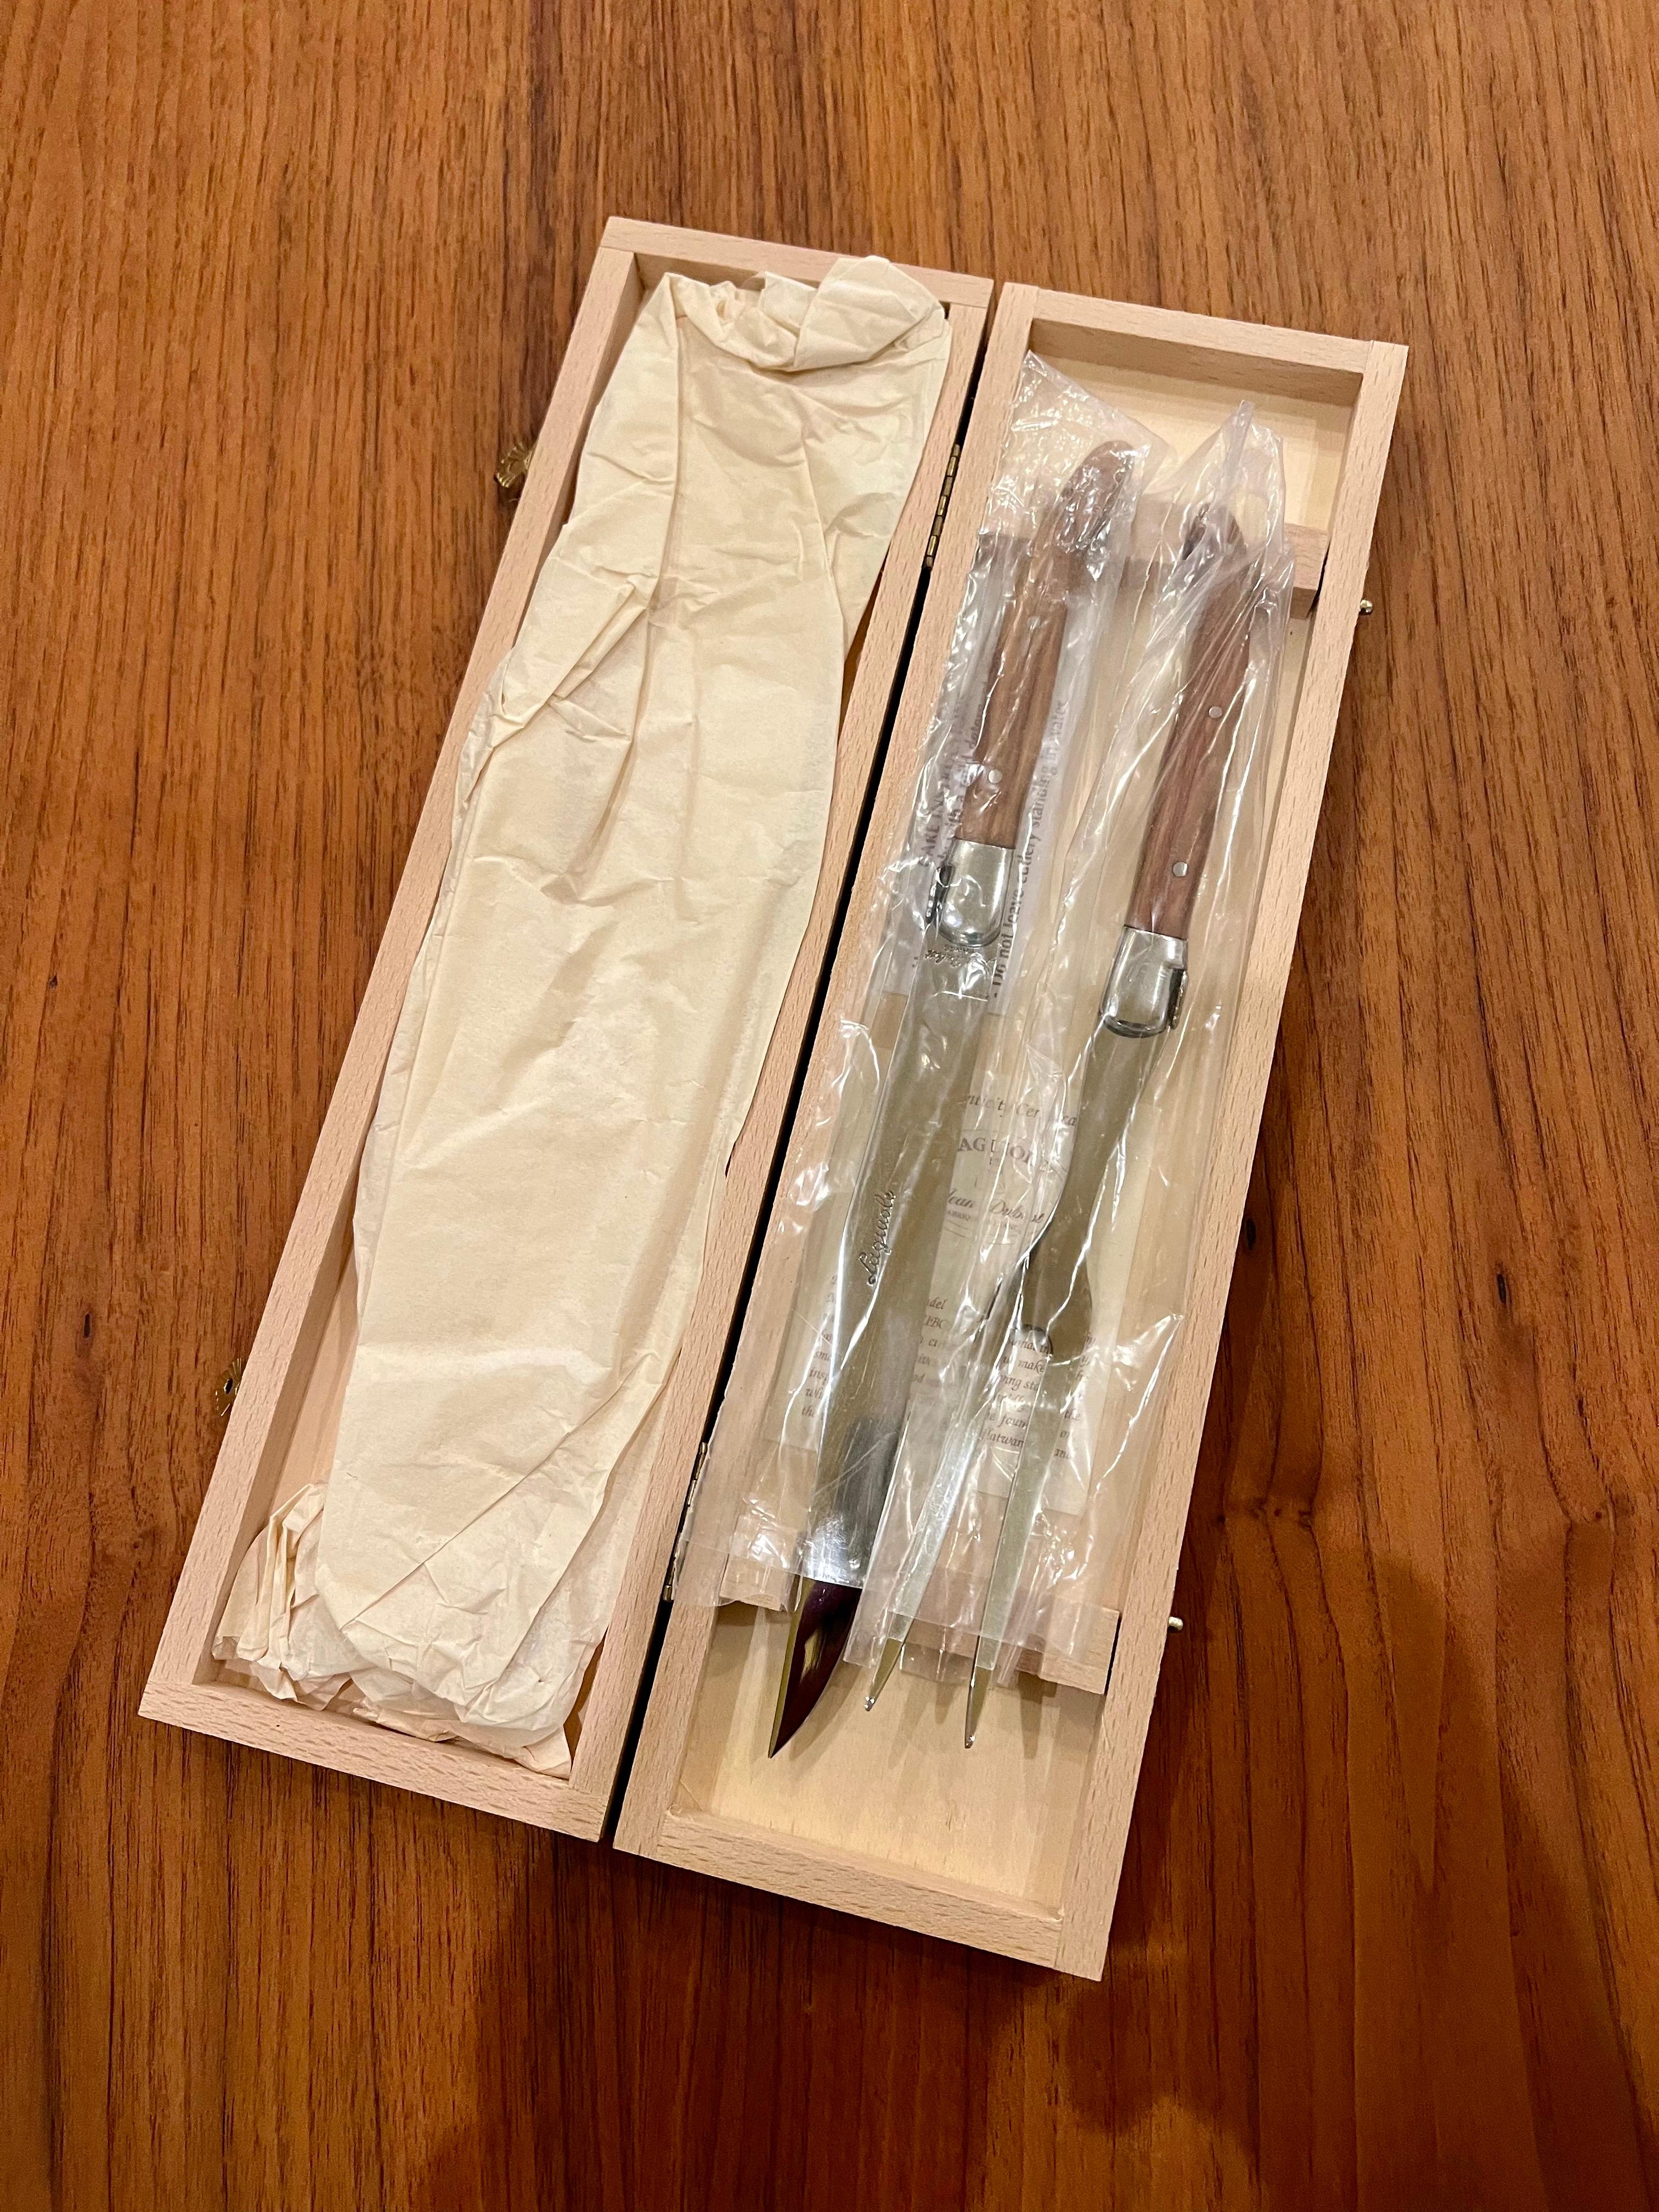 Contemporary Laguiole France Carving Set With Carving Fork And Carving Knife New in a Box For Sale